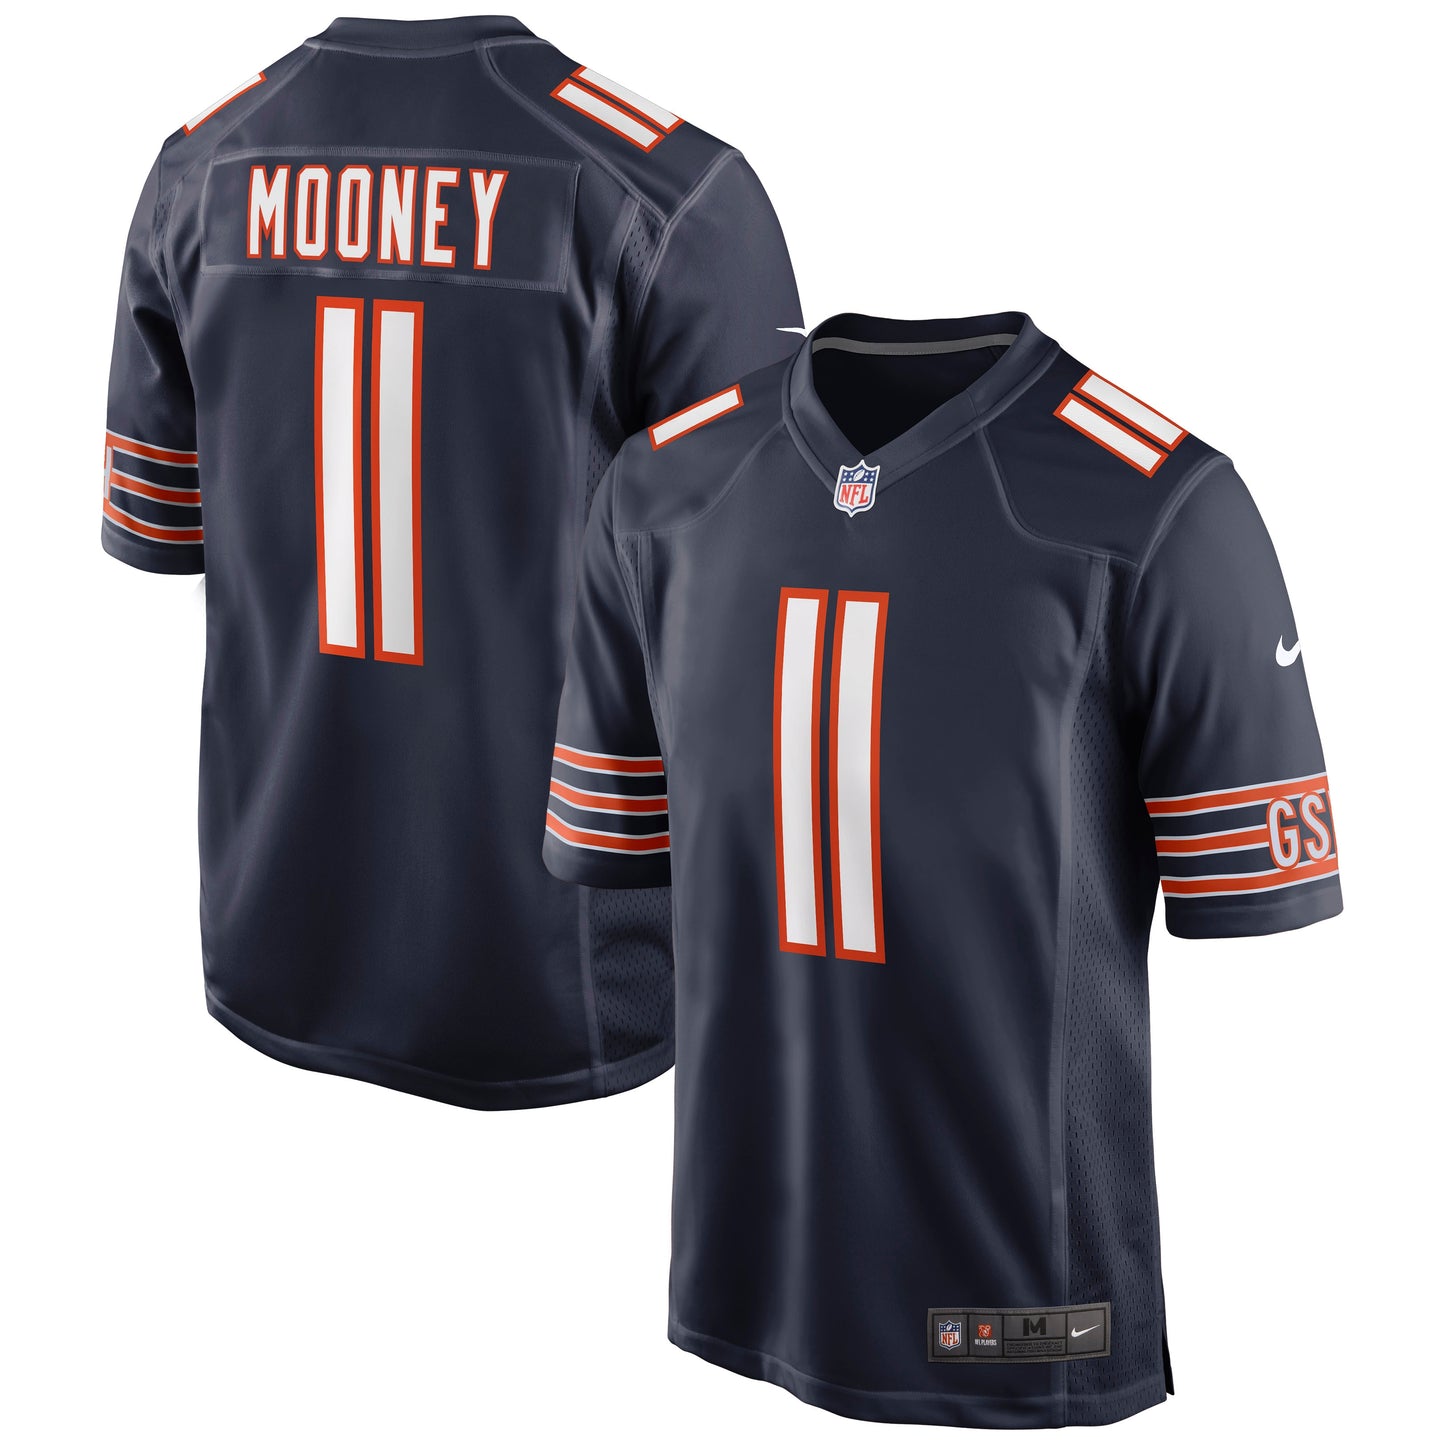 Darnell Mooney Chicago Bears Nike Game Jersey - Navy